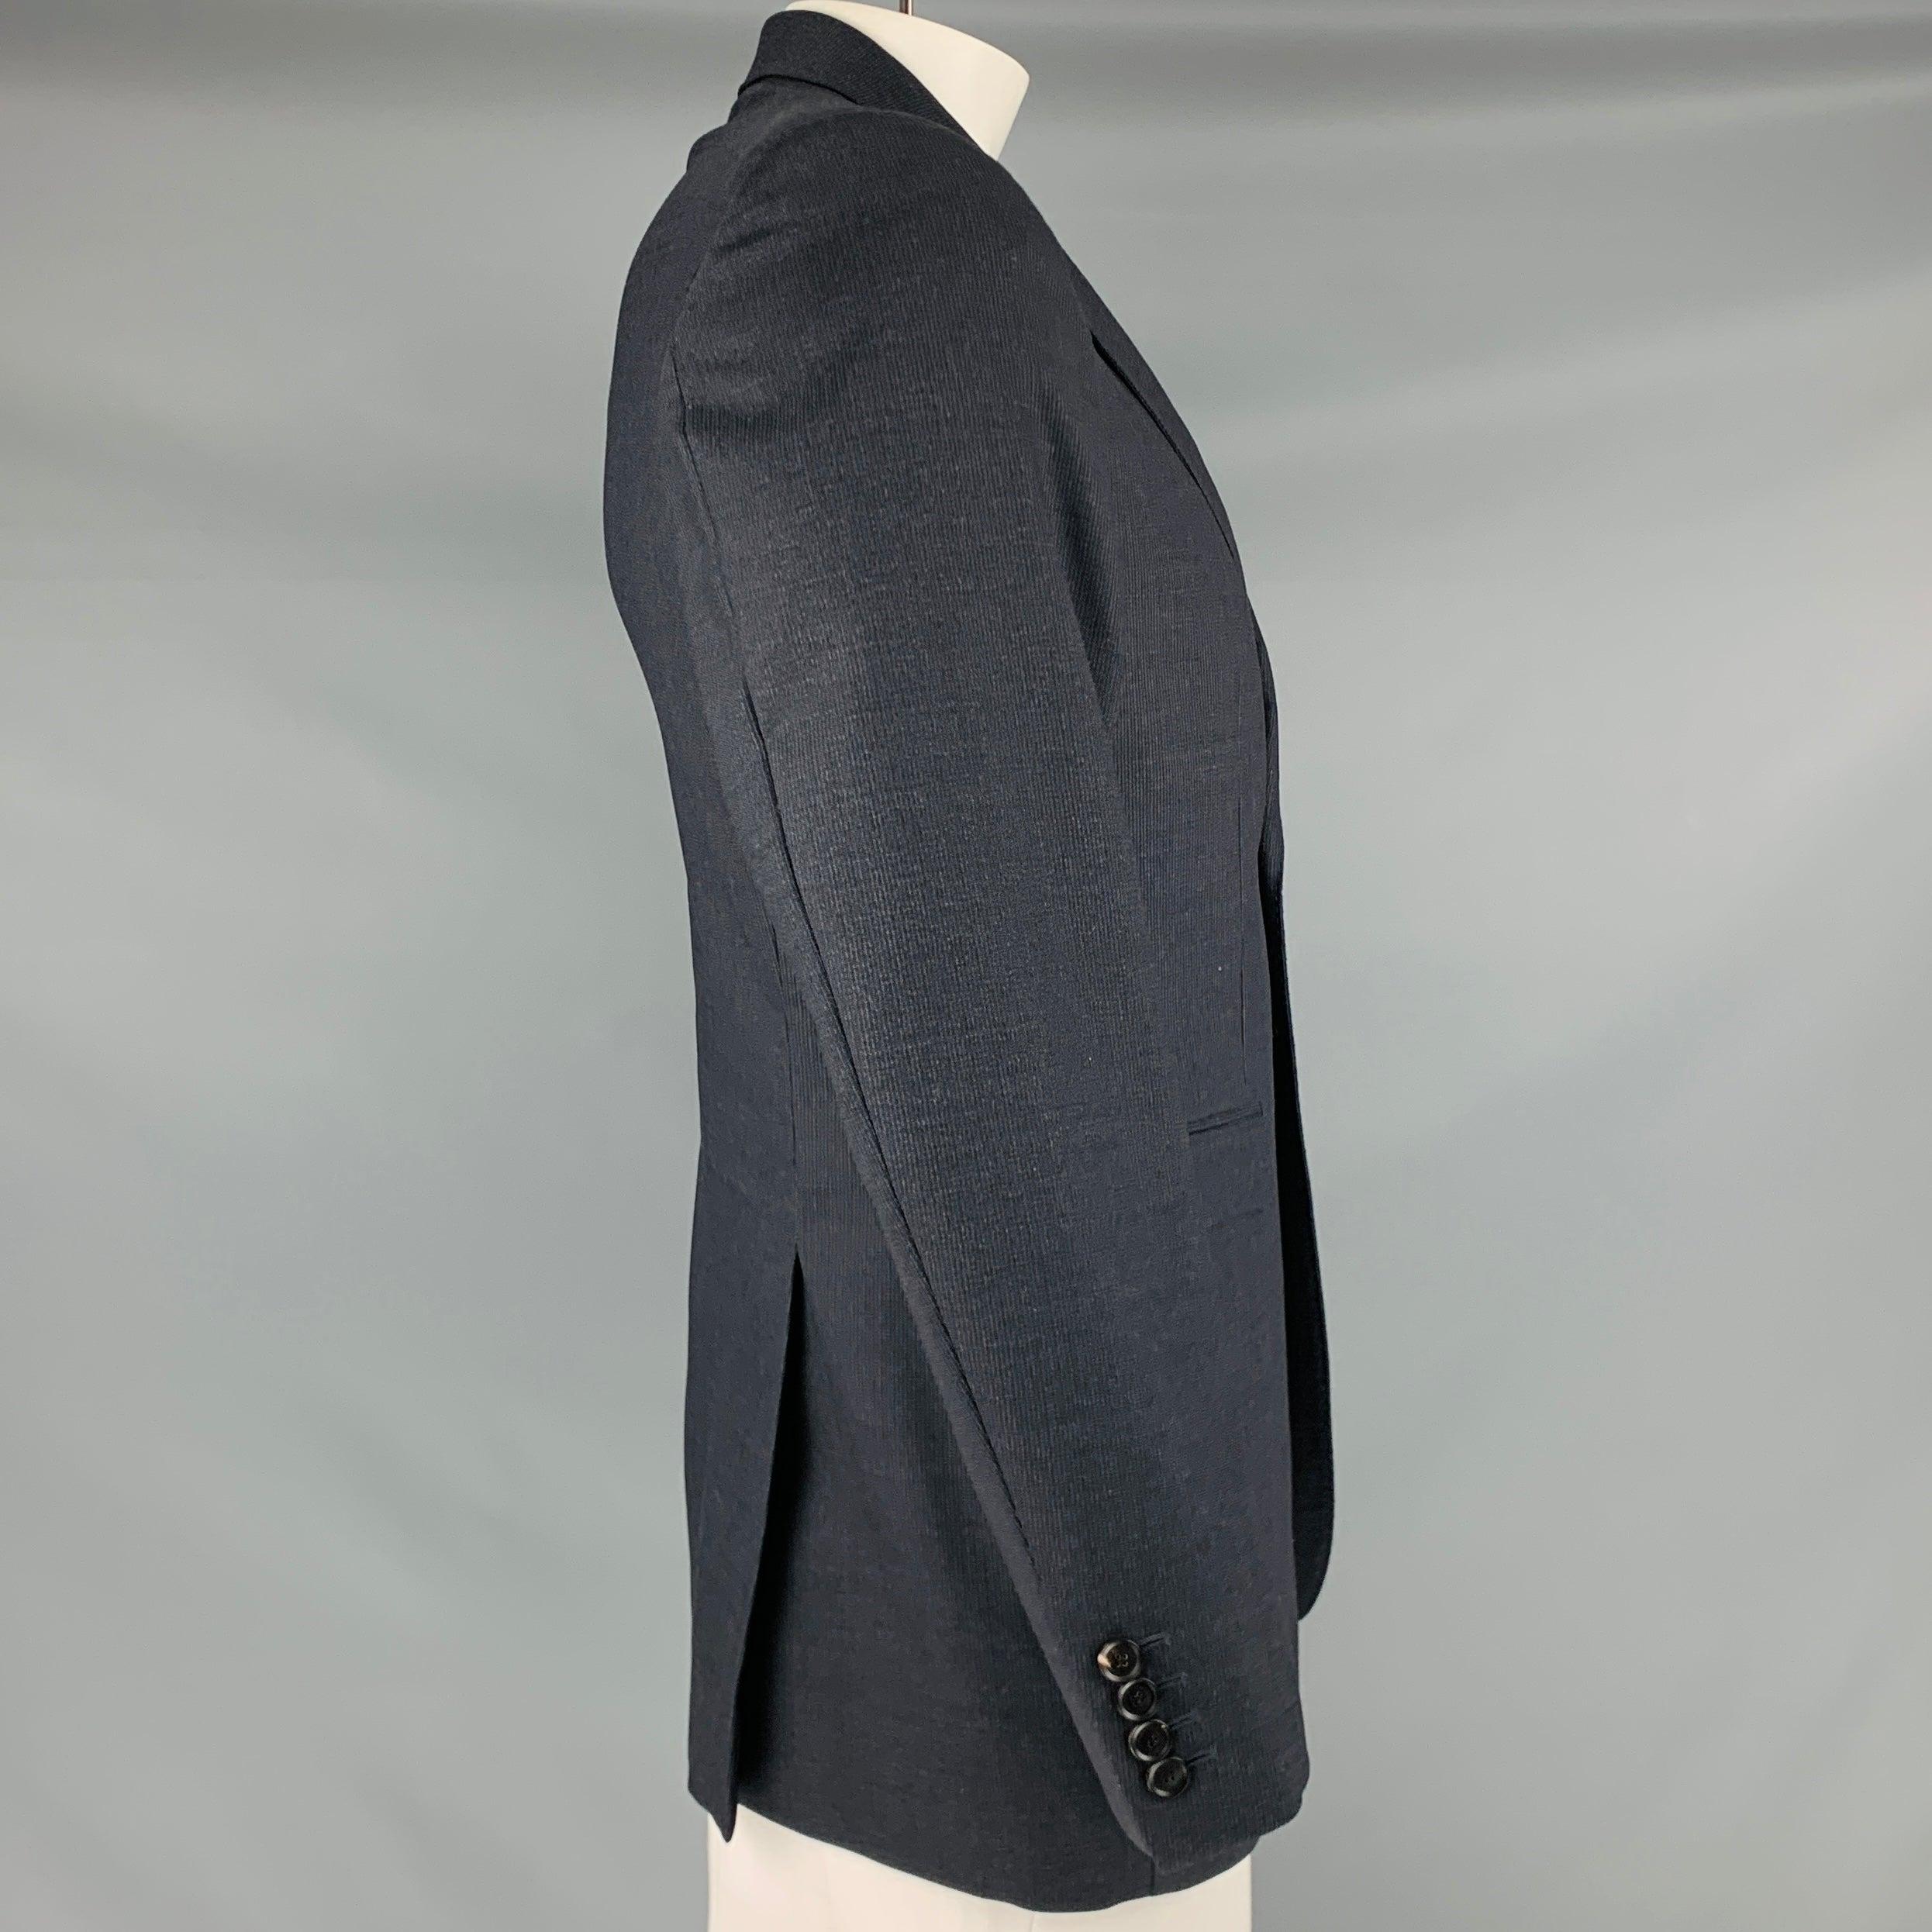 BURBERRY PRORSUM sport coat
in a grey virgin wool fabric featuring a textured style, notch lapel, and double button closure. Made in Italy.Very Good Pre-Owned Condition. Minor signs of wear. 

Marked:   52 

Measurements: 
 
Shoulder: 16.5 inches